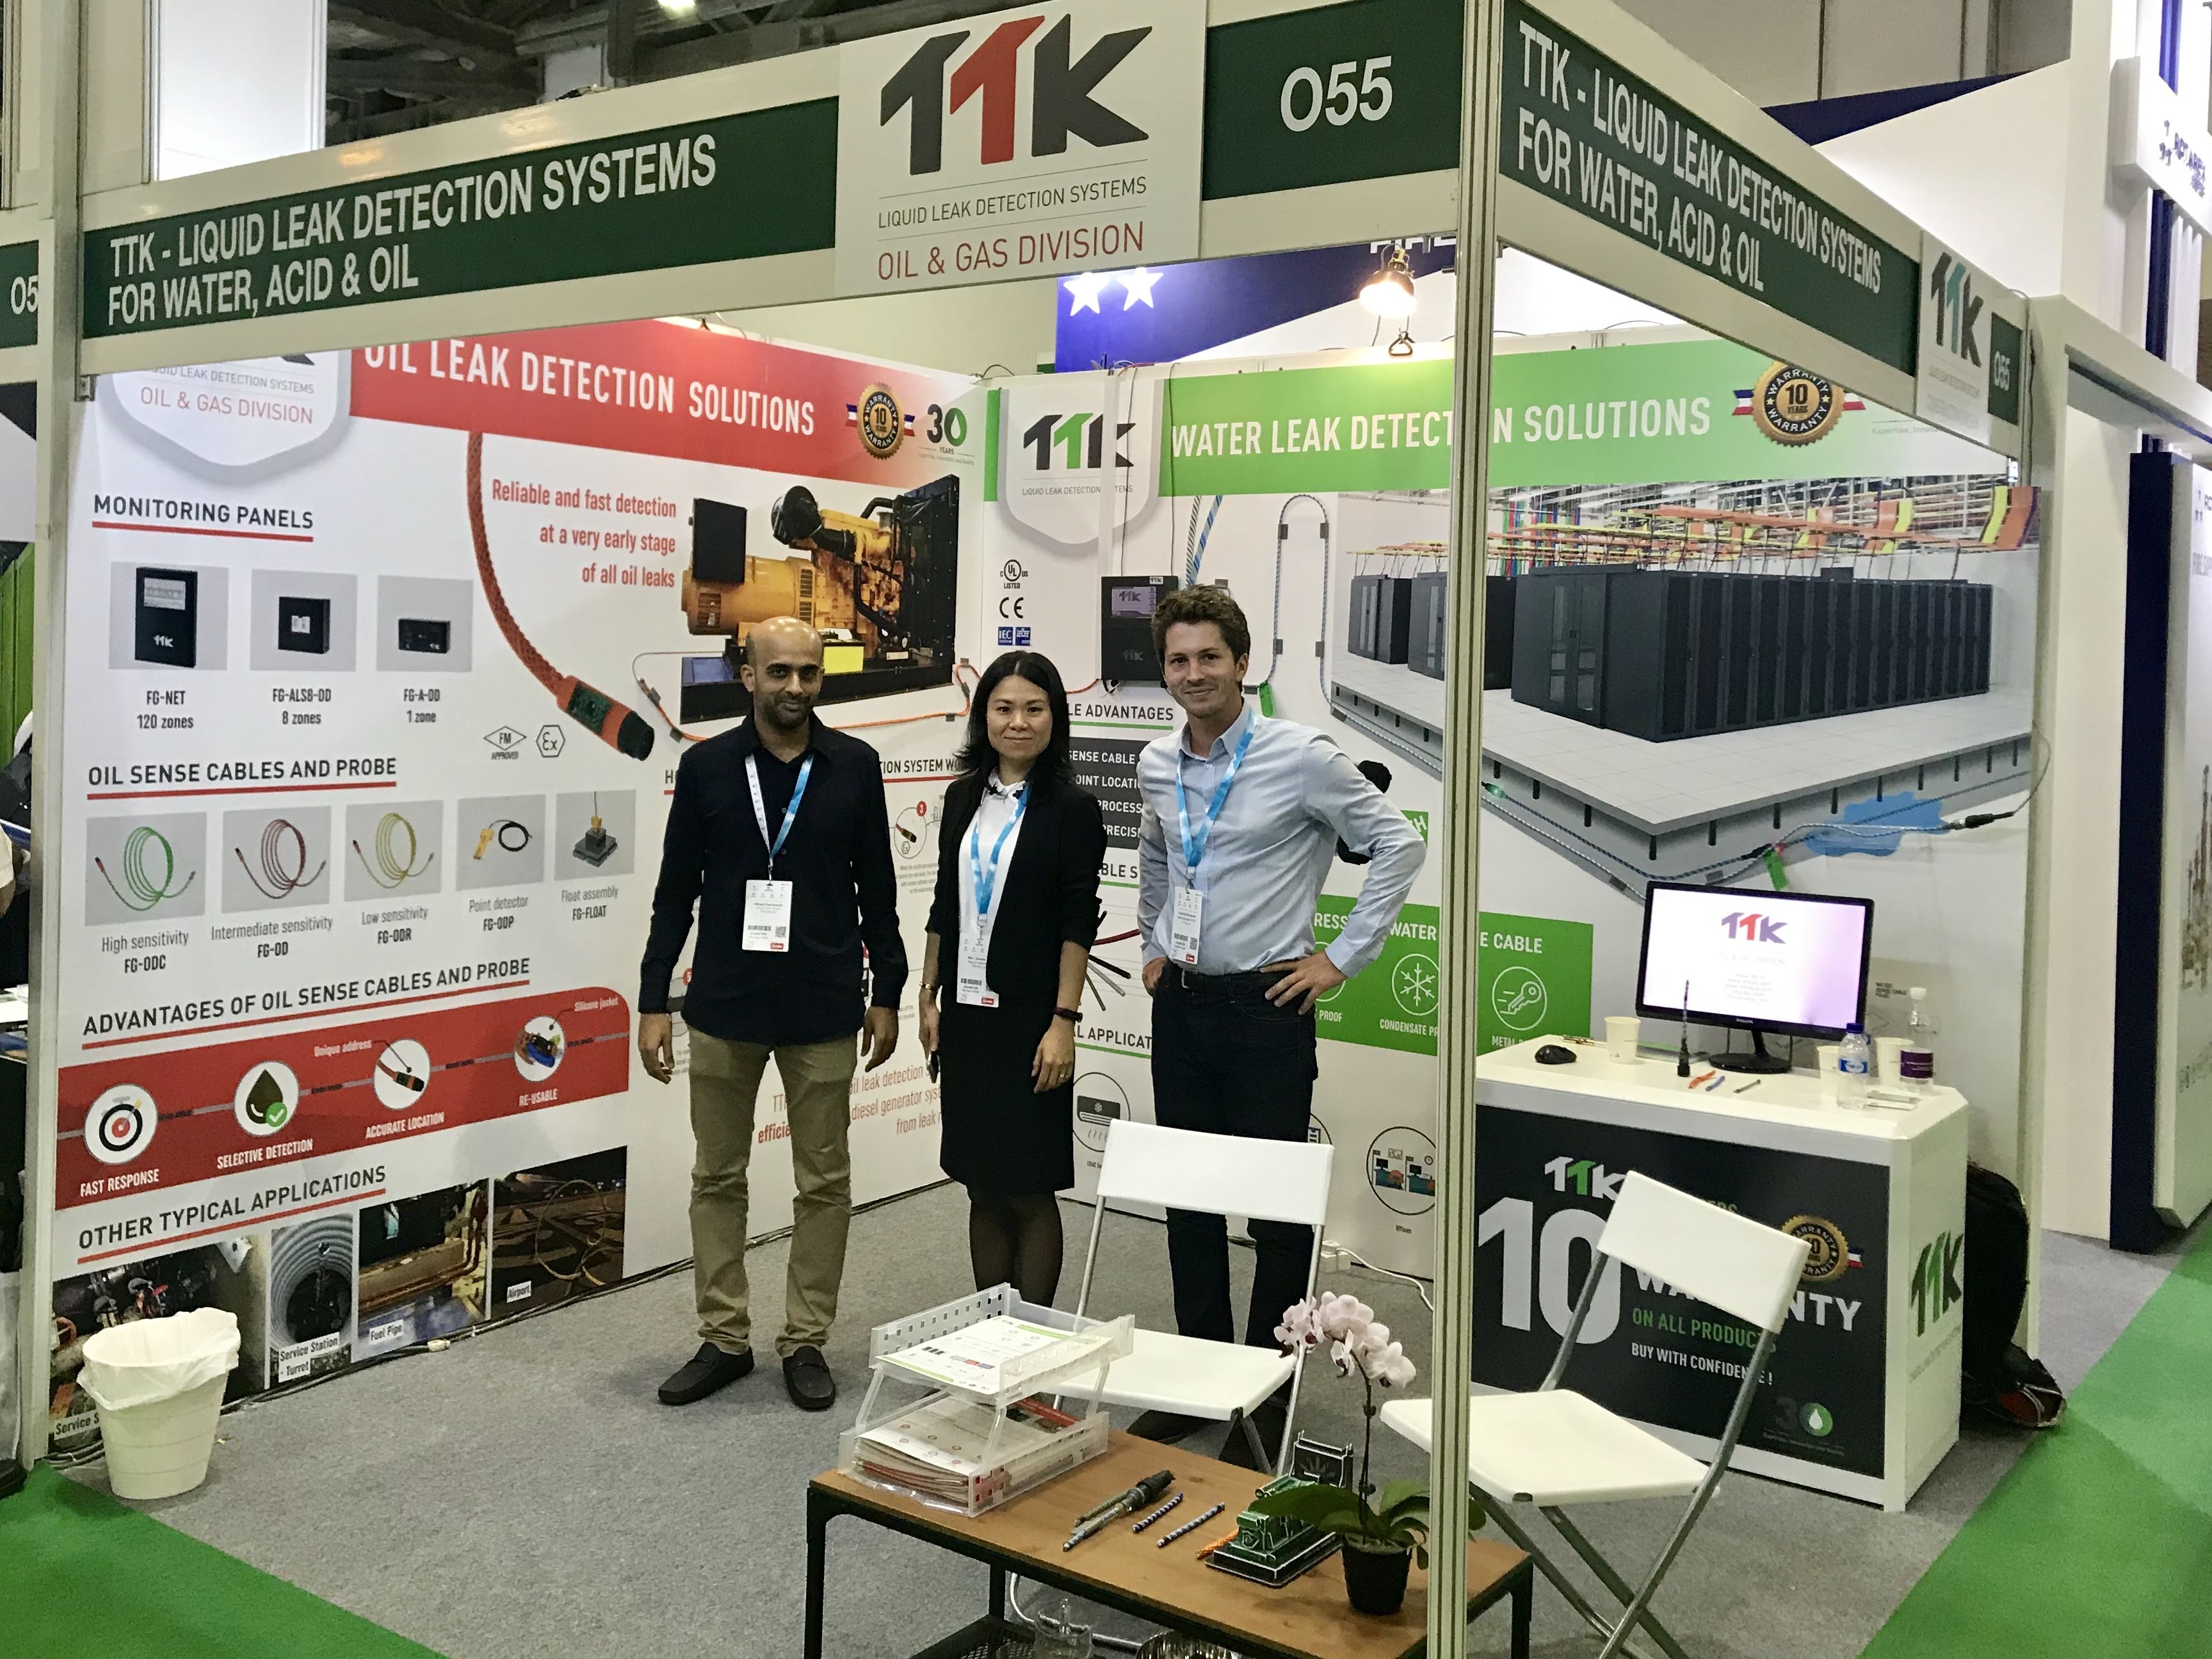 Thank You For Visiting Us At DCW Singapore 2019